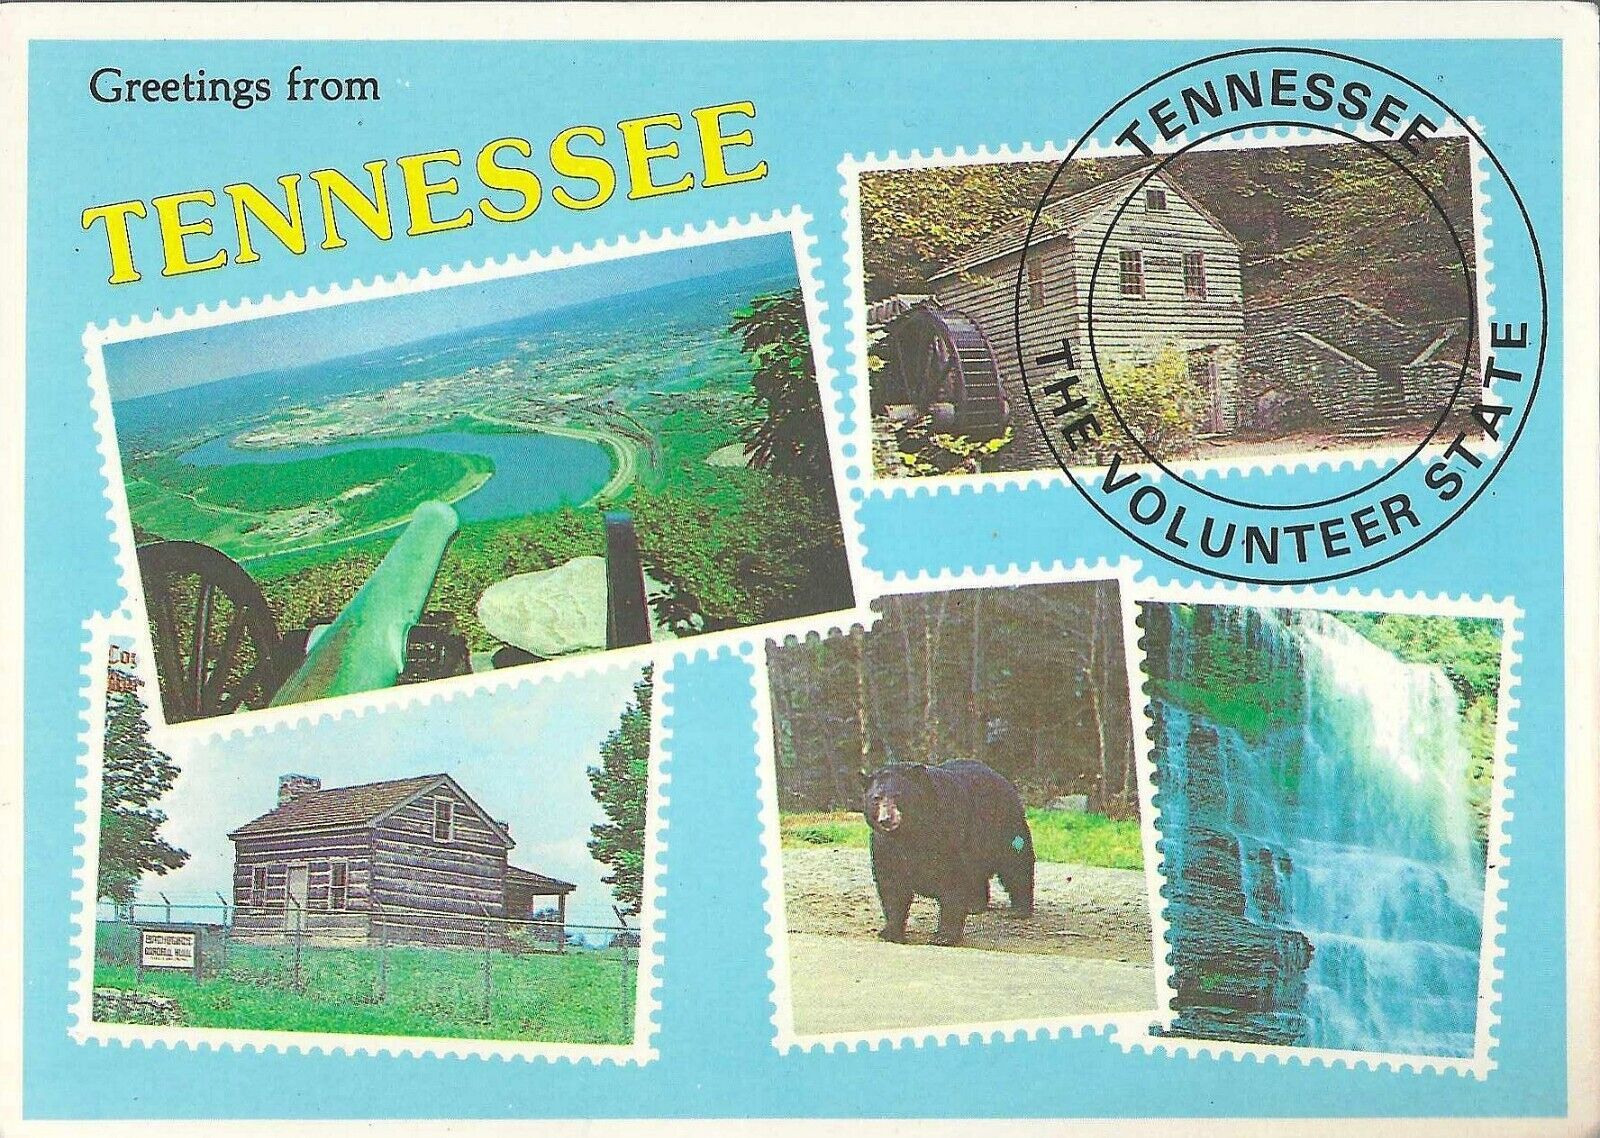 VTG Postcard Greetings From Tennessee The Volunteer State Multiview Unposted